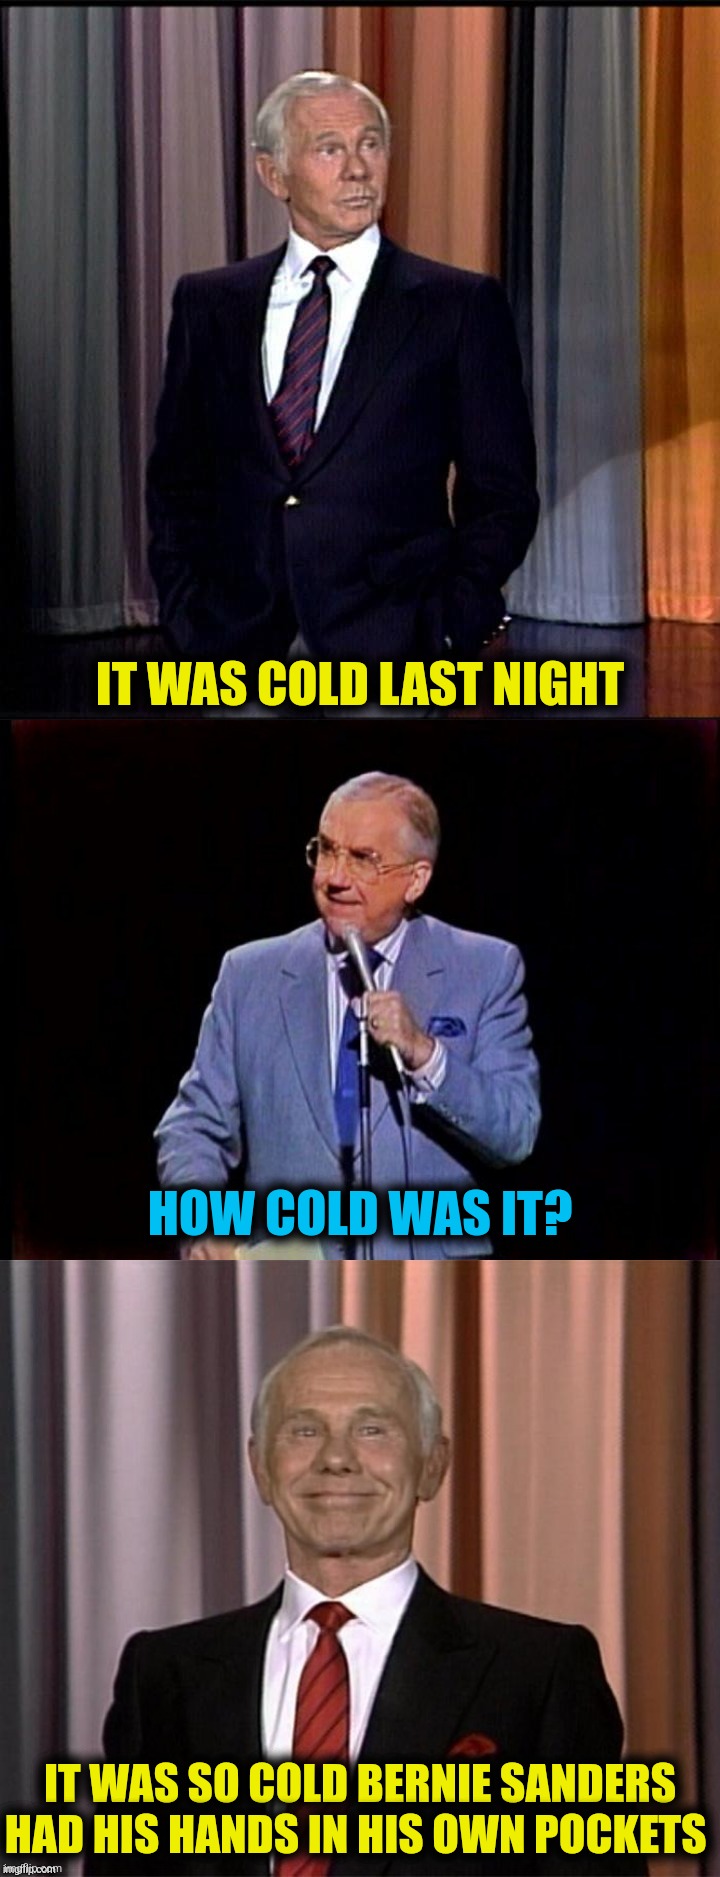 IT WAS COLD LAST NIGHT HOW COLD WAS IT? IT WAS SO COLD BERNIE SANDERS HAD HIS HANDS IN HIS OWN POCKETS | made w/ Imgflip meme maker